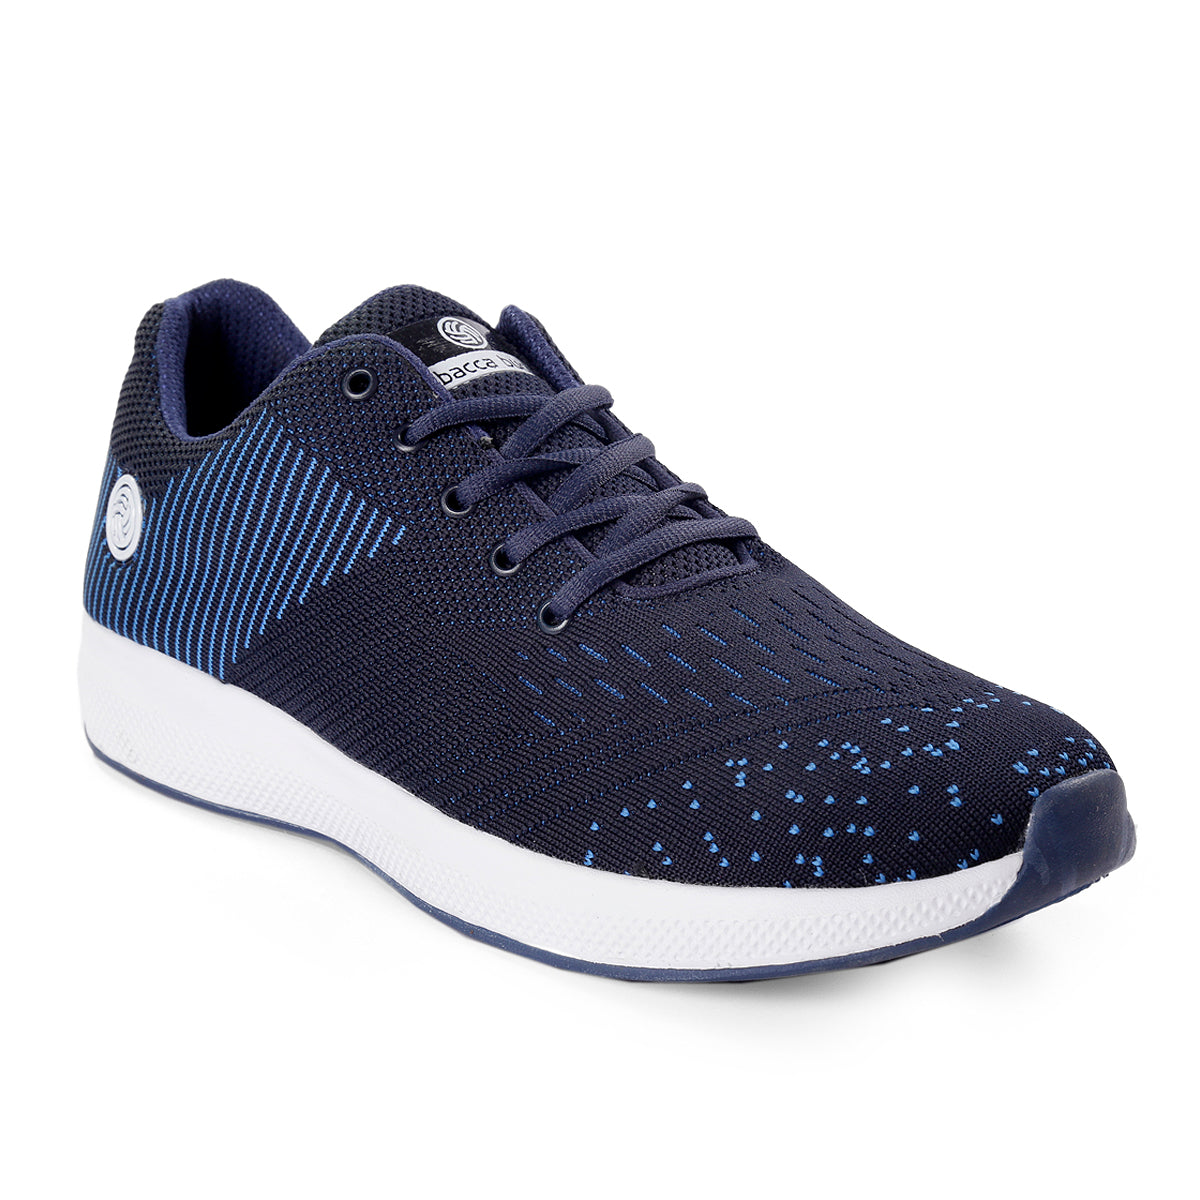 Bacca Bucci Running Shoes Lightweight Fashion Tennis Athletic Shoes for Outdoor Sports- PLUS size available - Bacca Bucci